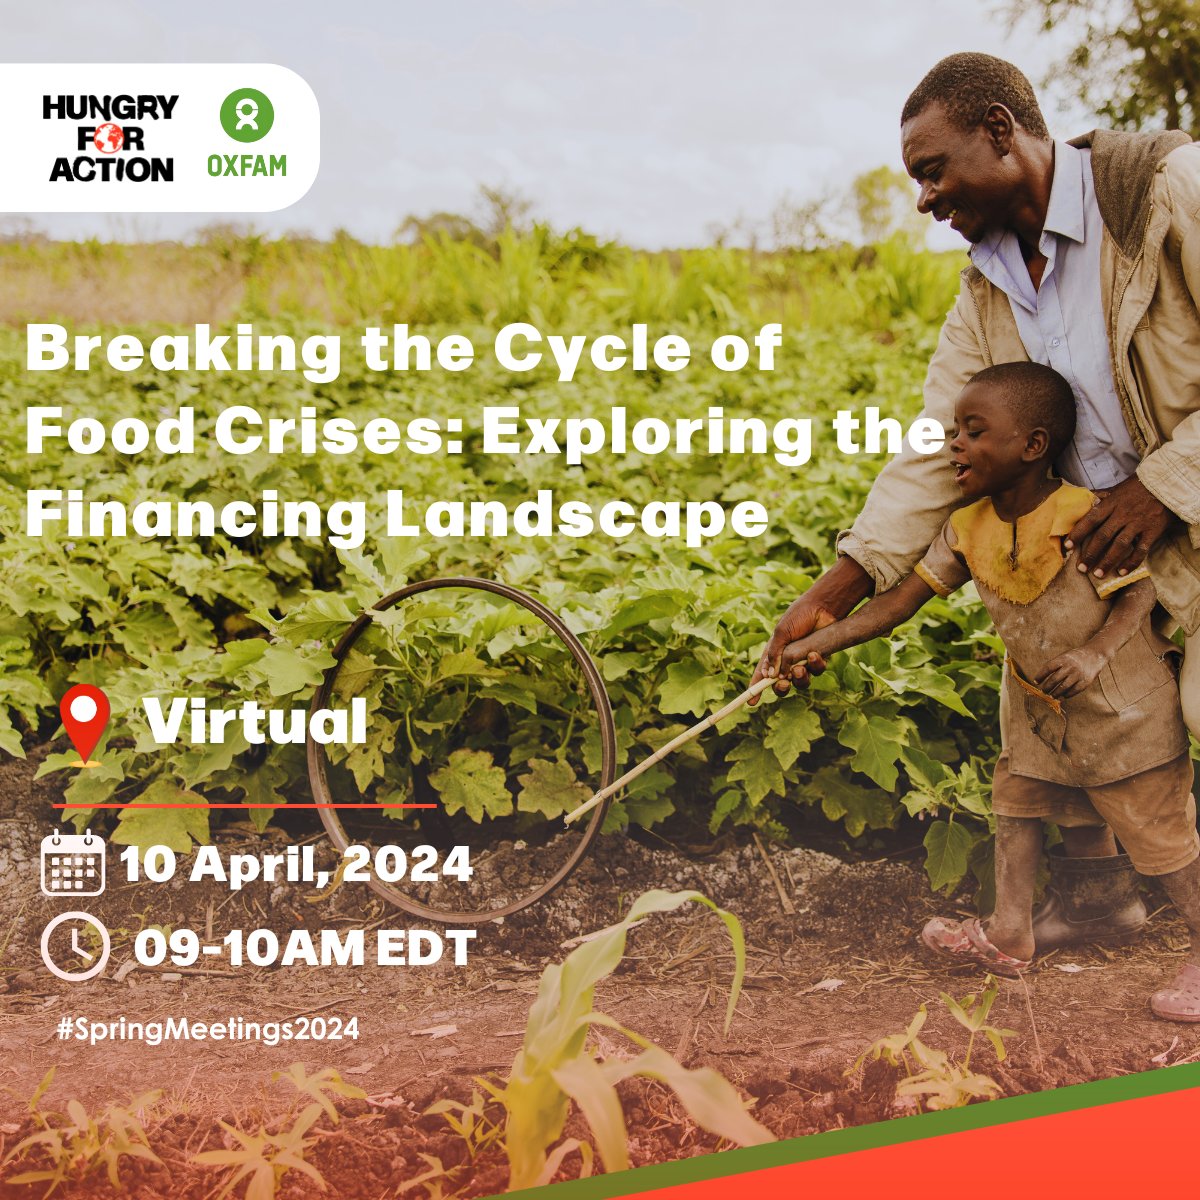 📣 #SavetheDate. How crucial is debt and MDB reform in the fight against hunger in Africa? Join this insightful webinar to learn more on this topic. 🗓️ April 10, 🕔 09-10AM EST 🔗 RSVP: bitly.ws/3huq6 #HungryforAction🤝 @OxfaminAfrica @roppainfo #springmeetings2024